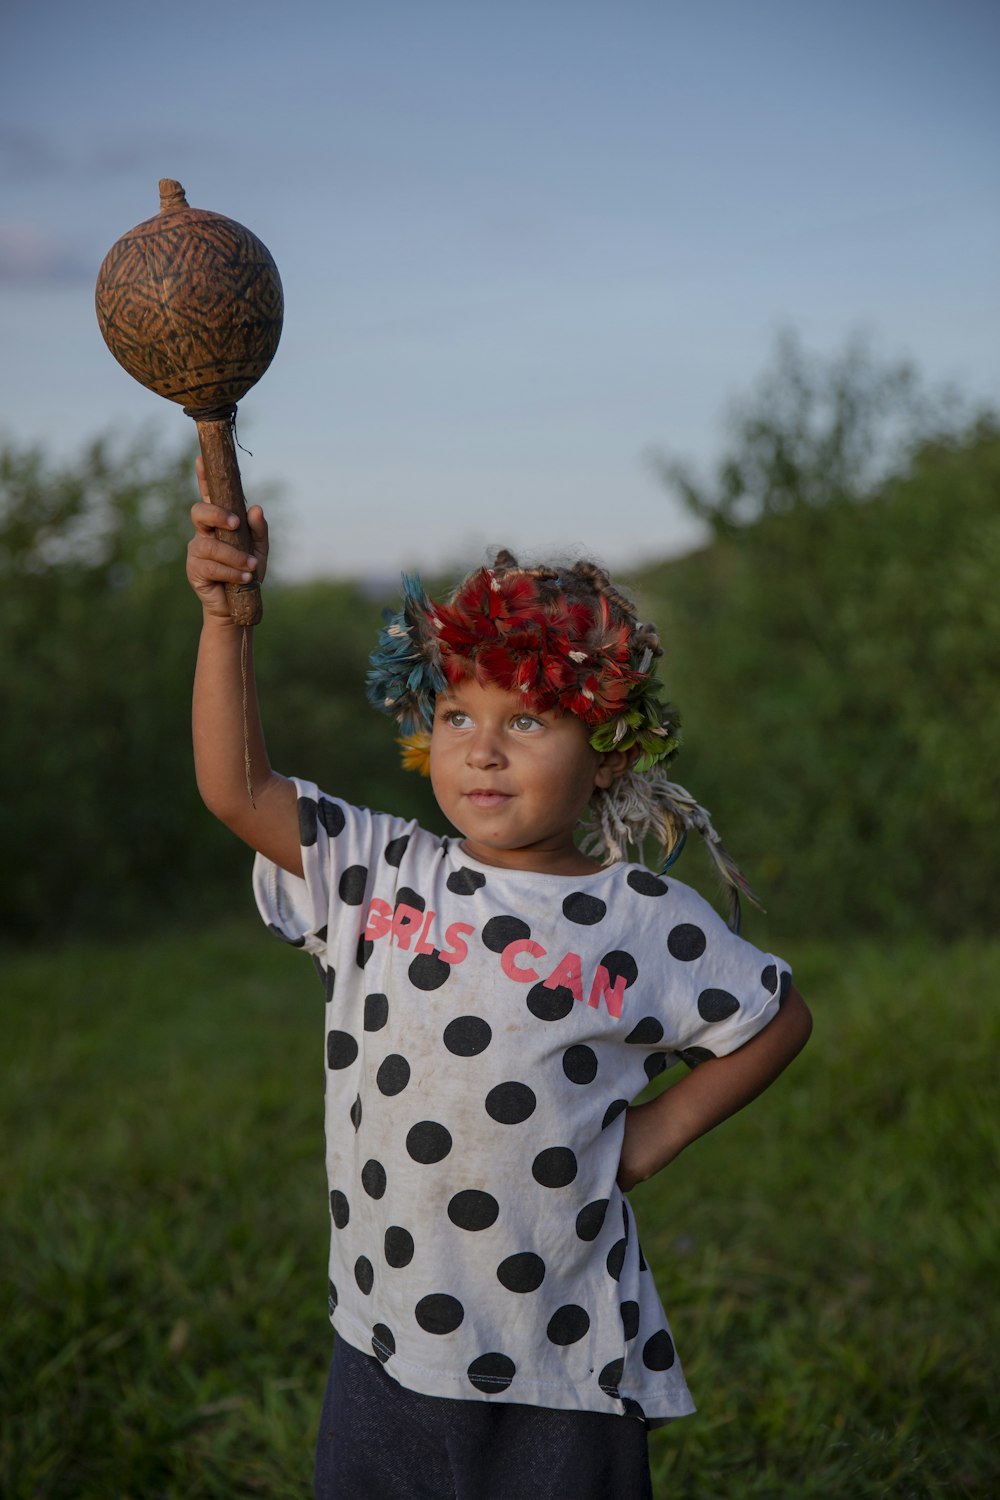 a little girl holding a wooden ball in her hand